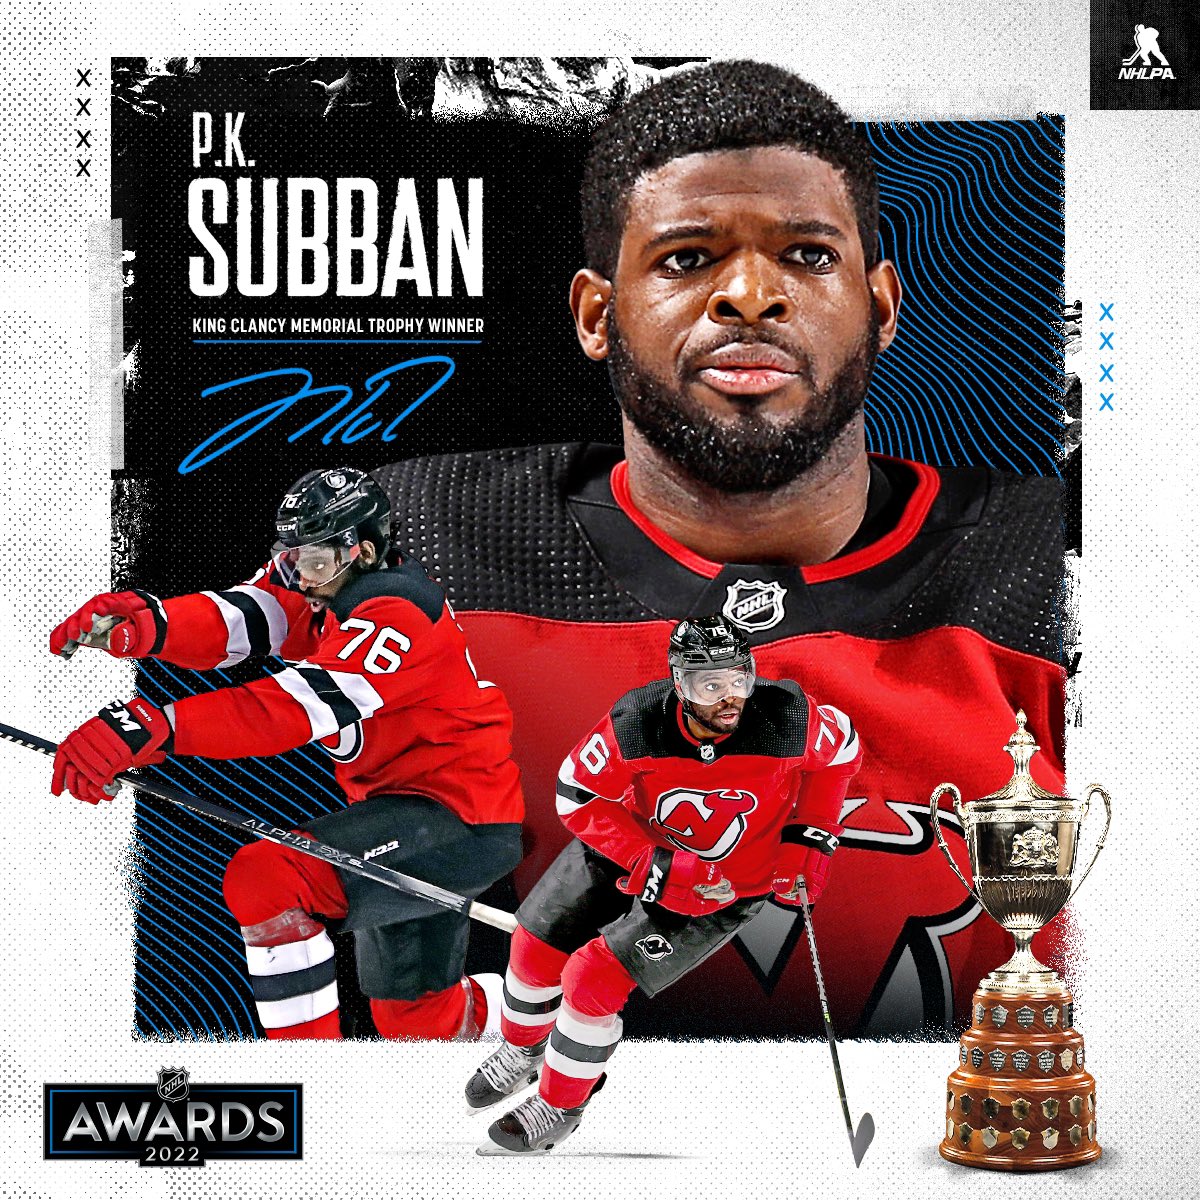 NHL New Jersey Devils - P. K. Subban Poster 